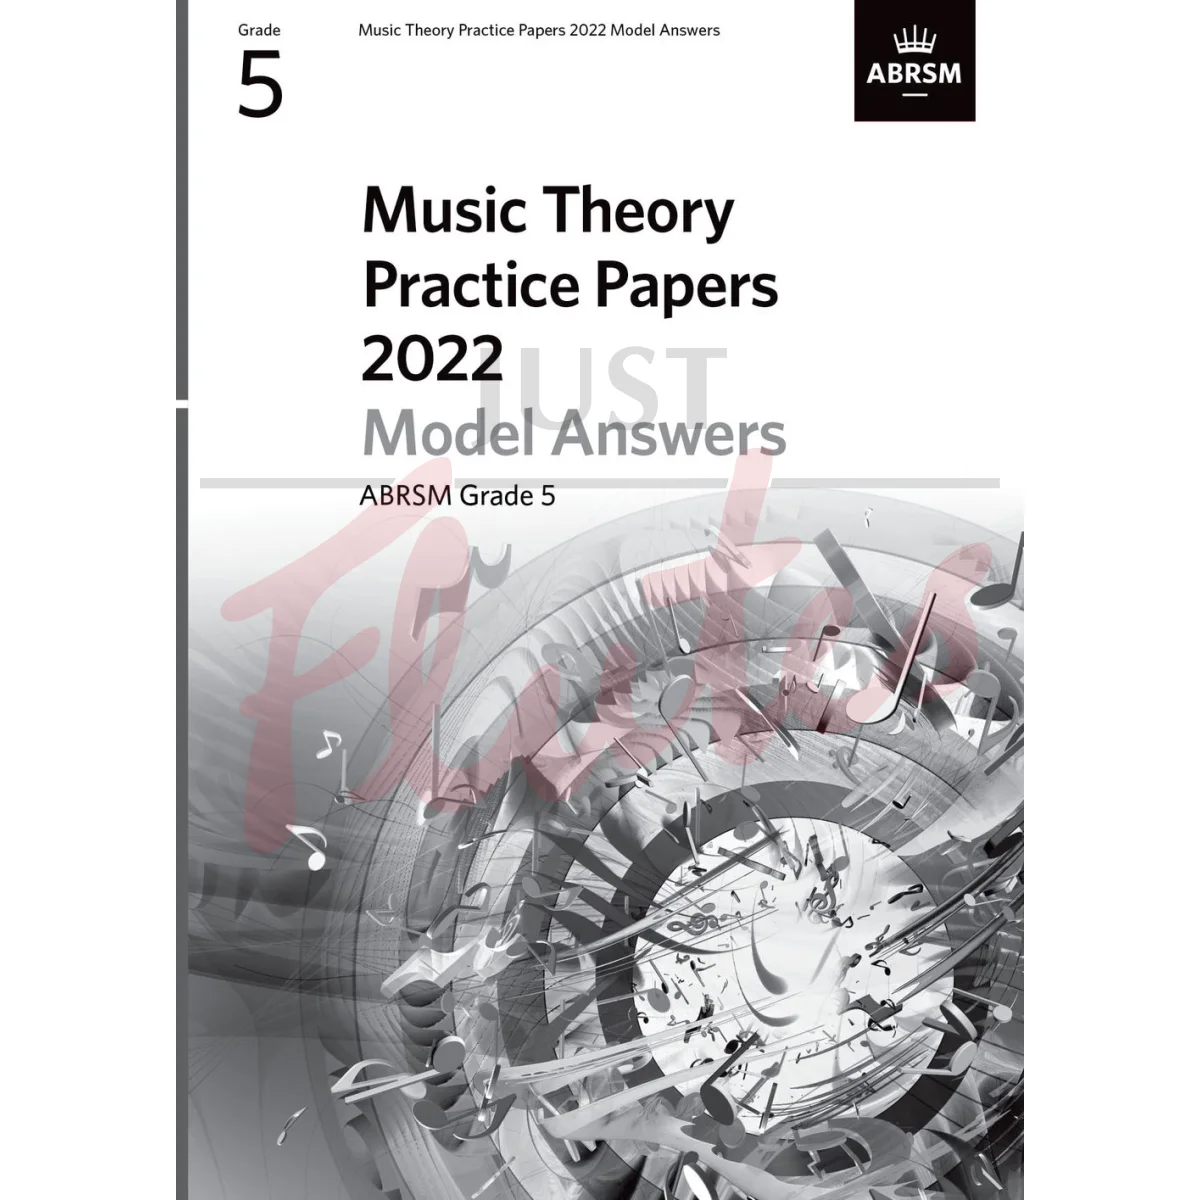 Music Theory Practice Papers 2022 Grade 5 - Model Answers